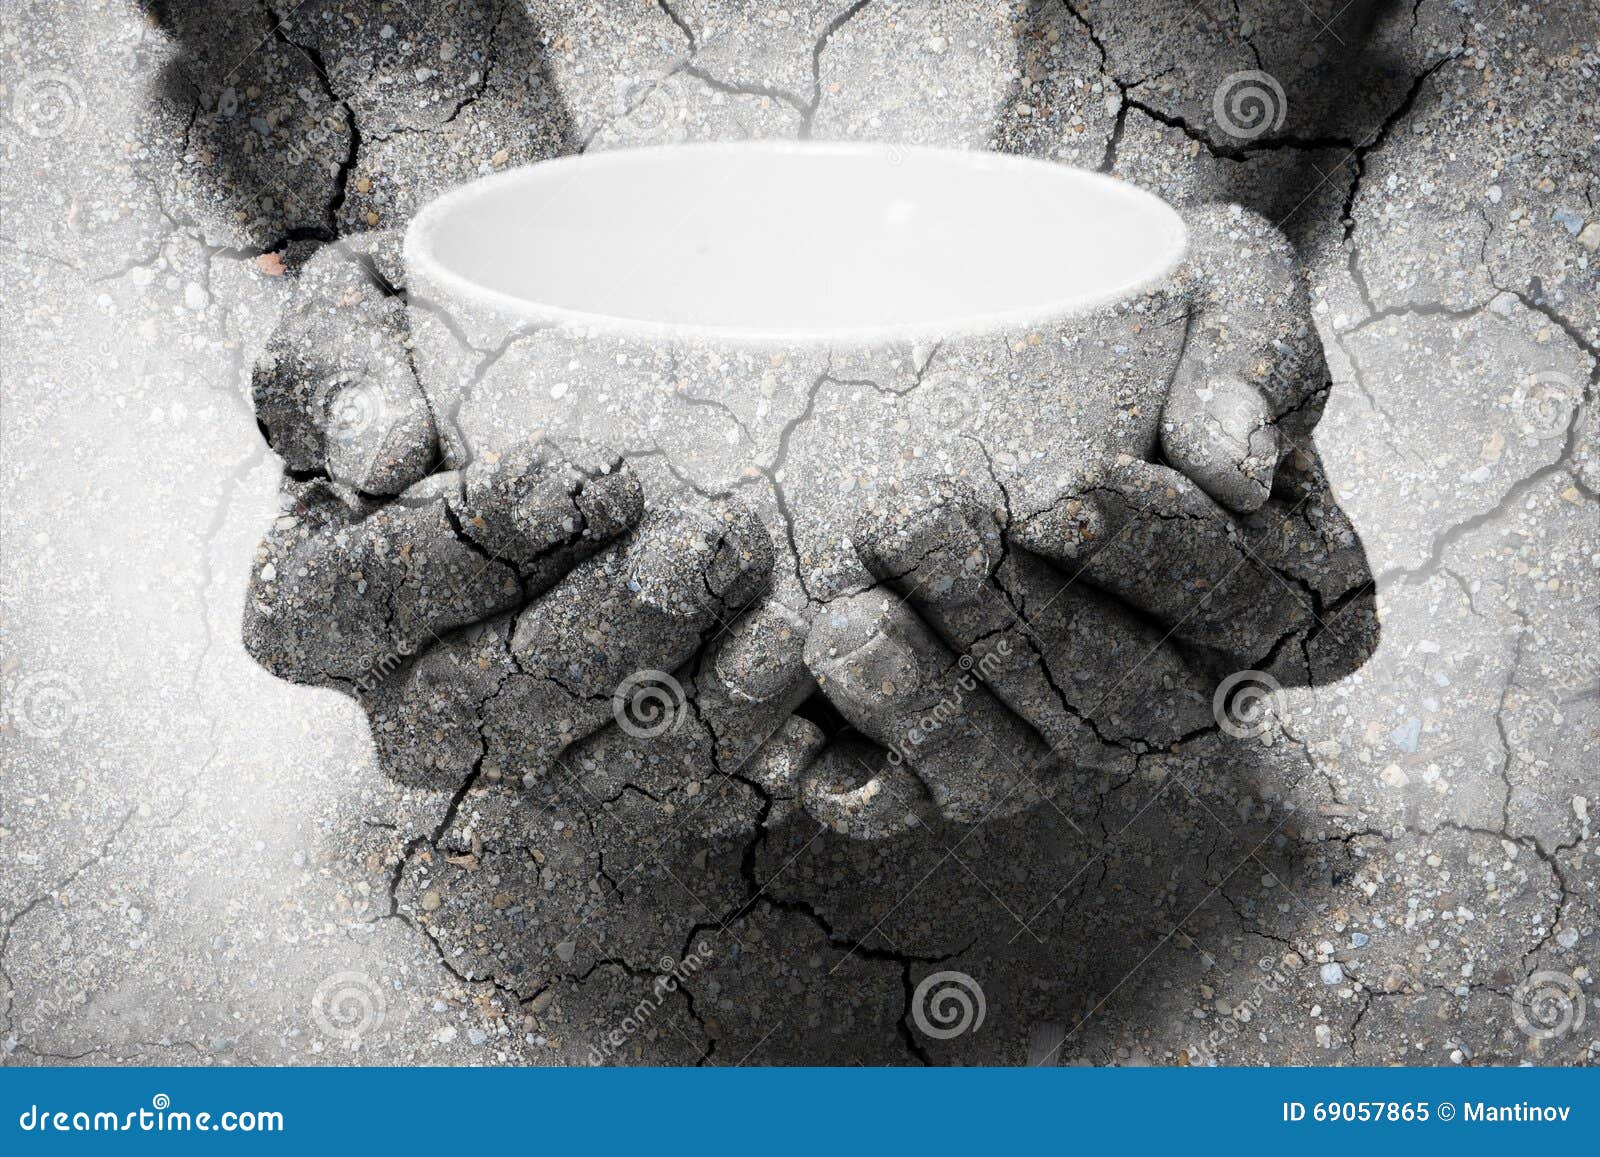 double exposure hunger begging hands and dry soil